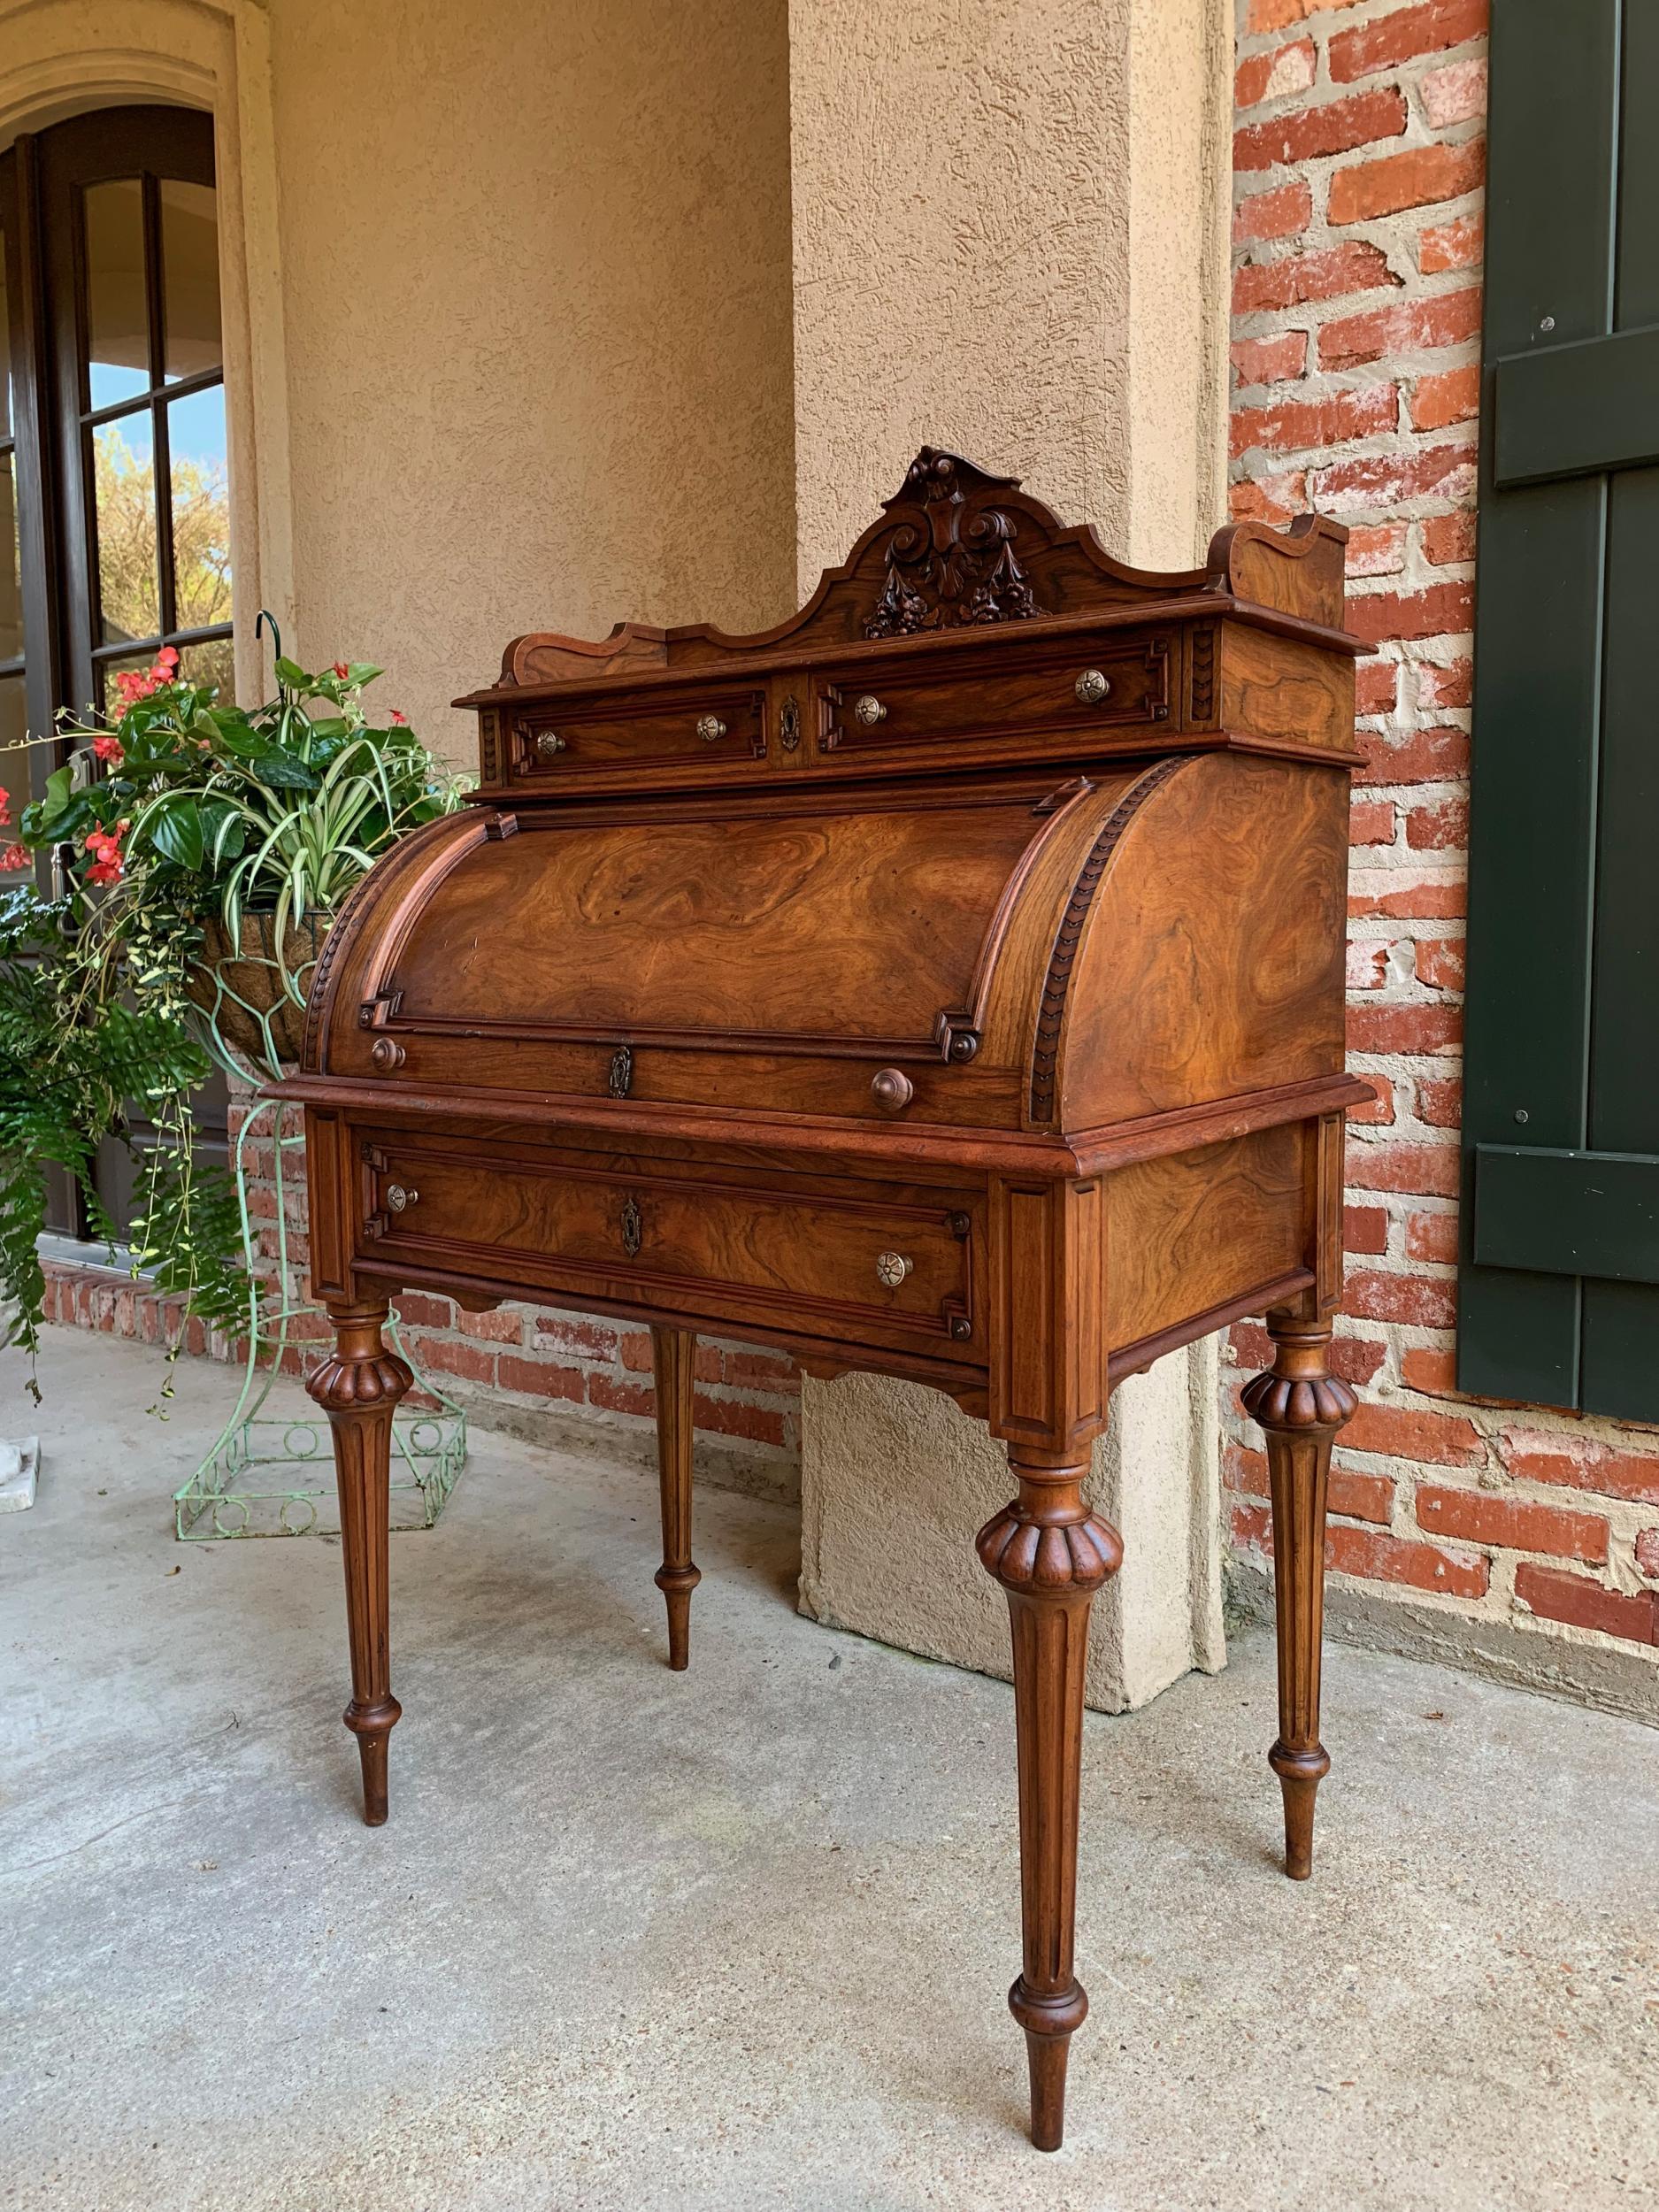 19th century French Walnut Roll Top Secretary Desk Henri II Biedermeier

~Direct from France~
~Beautiful antique French walnut secretary with fabulous detailing throughout and hints of Biedermeier style in the wood grains and interior